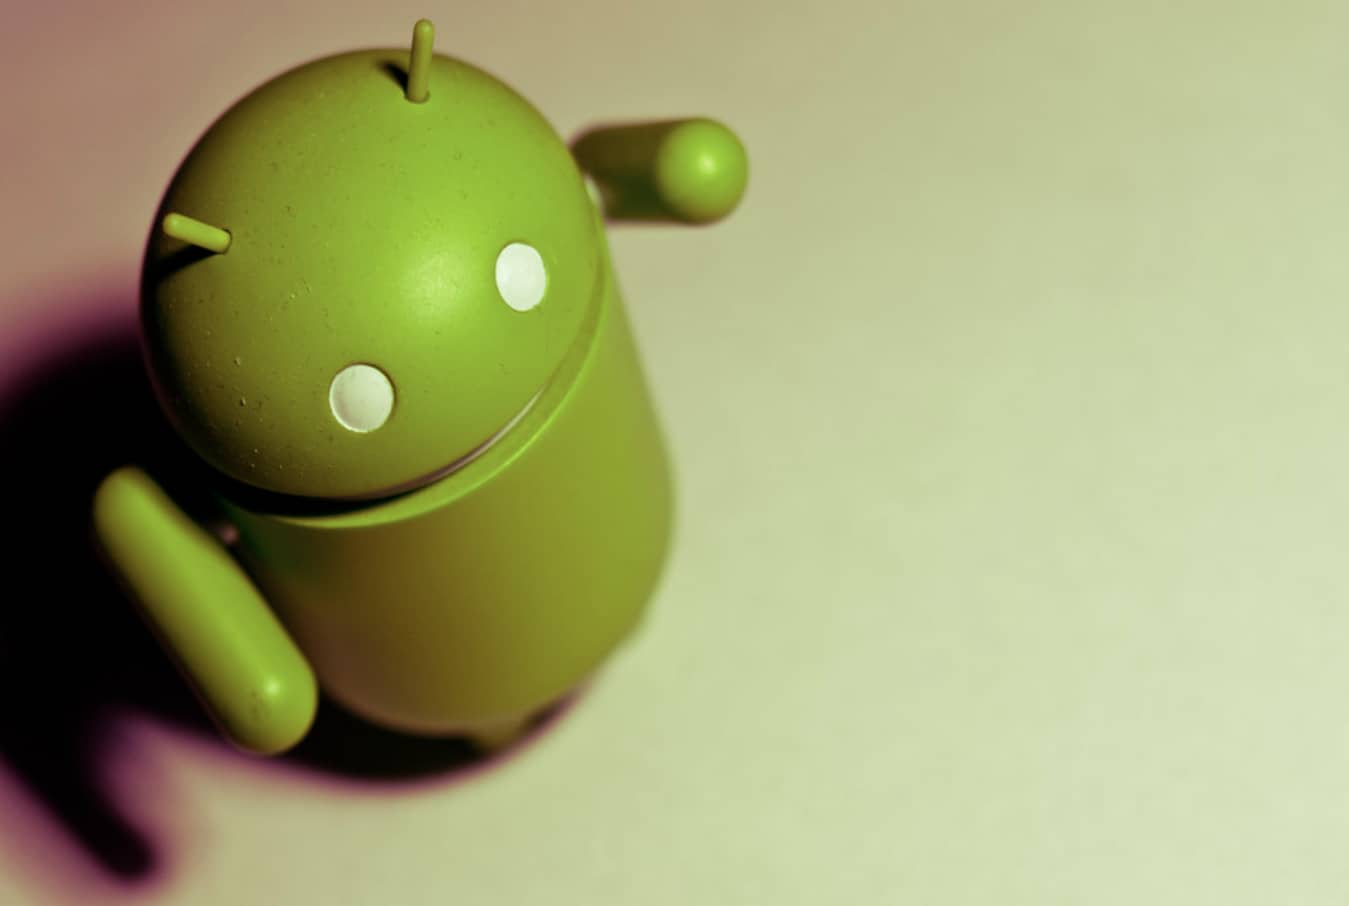 Android devices and their popularity